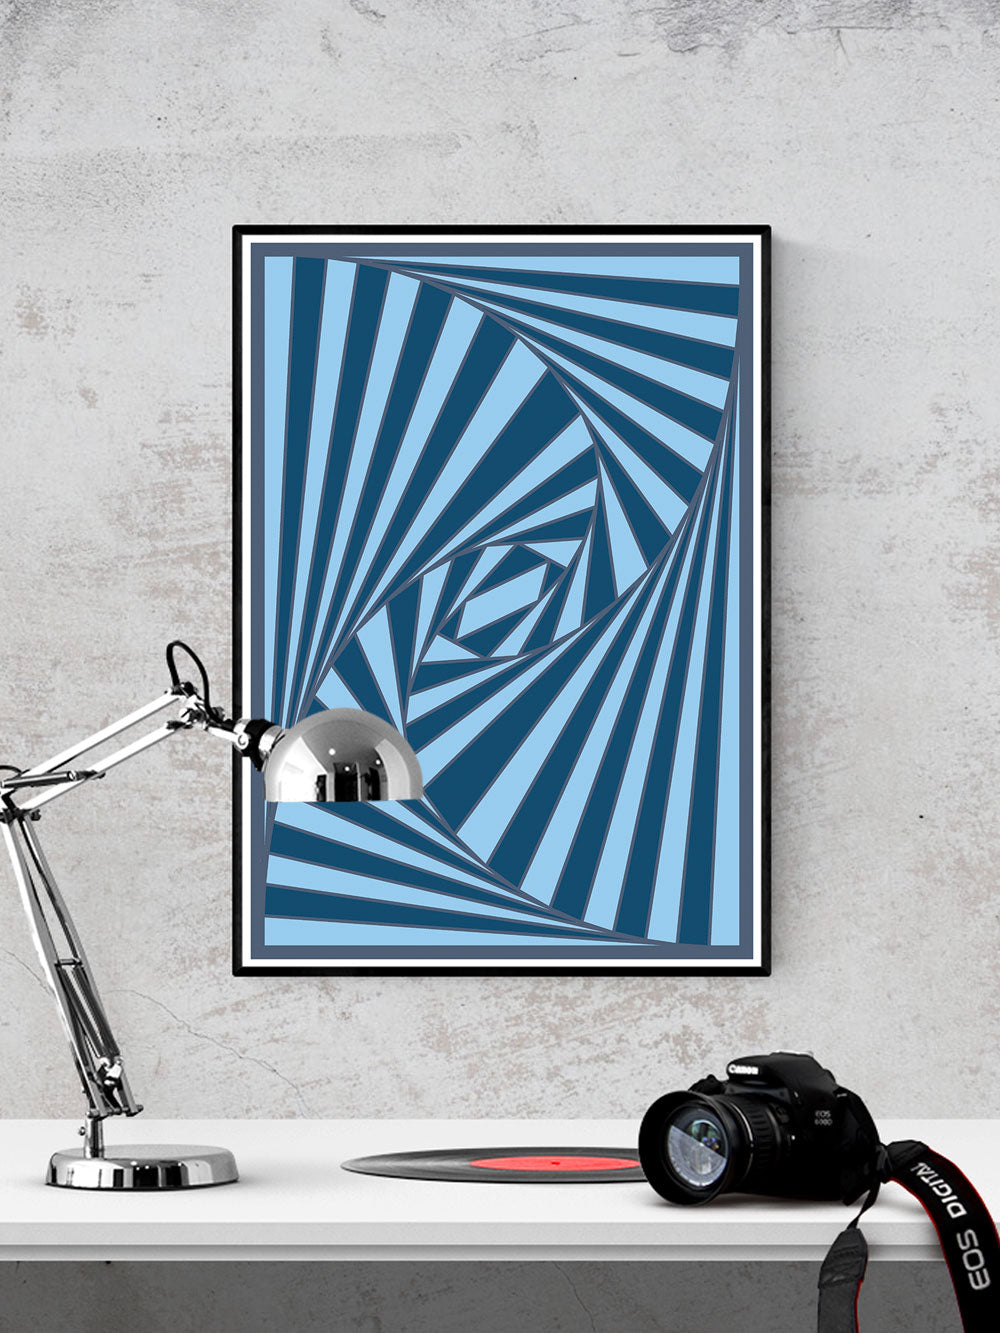 The Nightmare Trippy Abstract Art Print in a frame on a wall